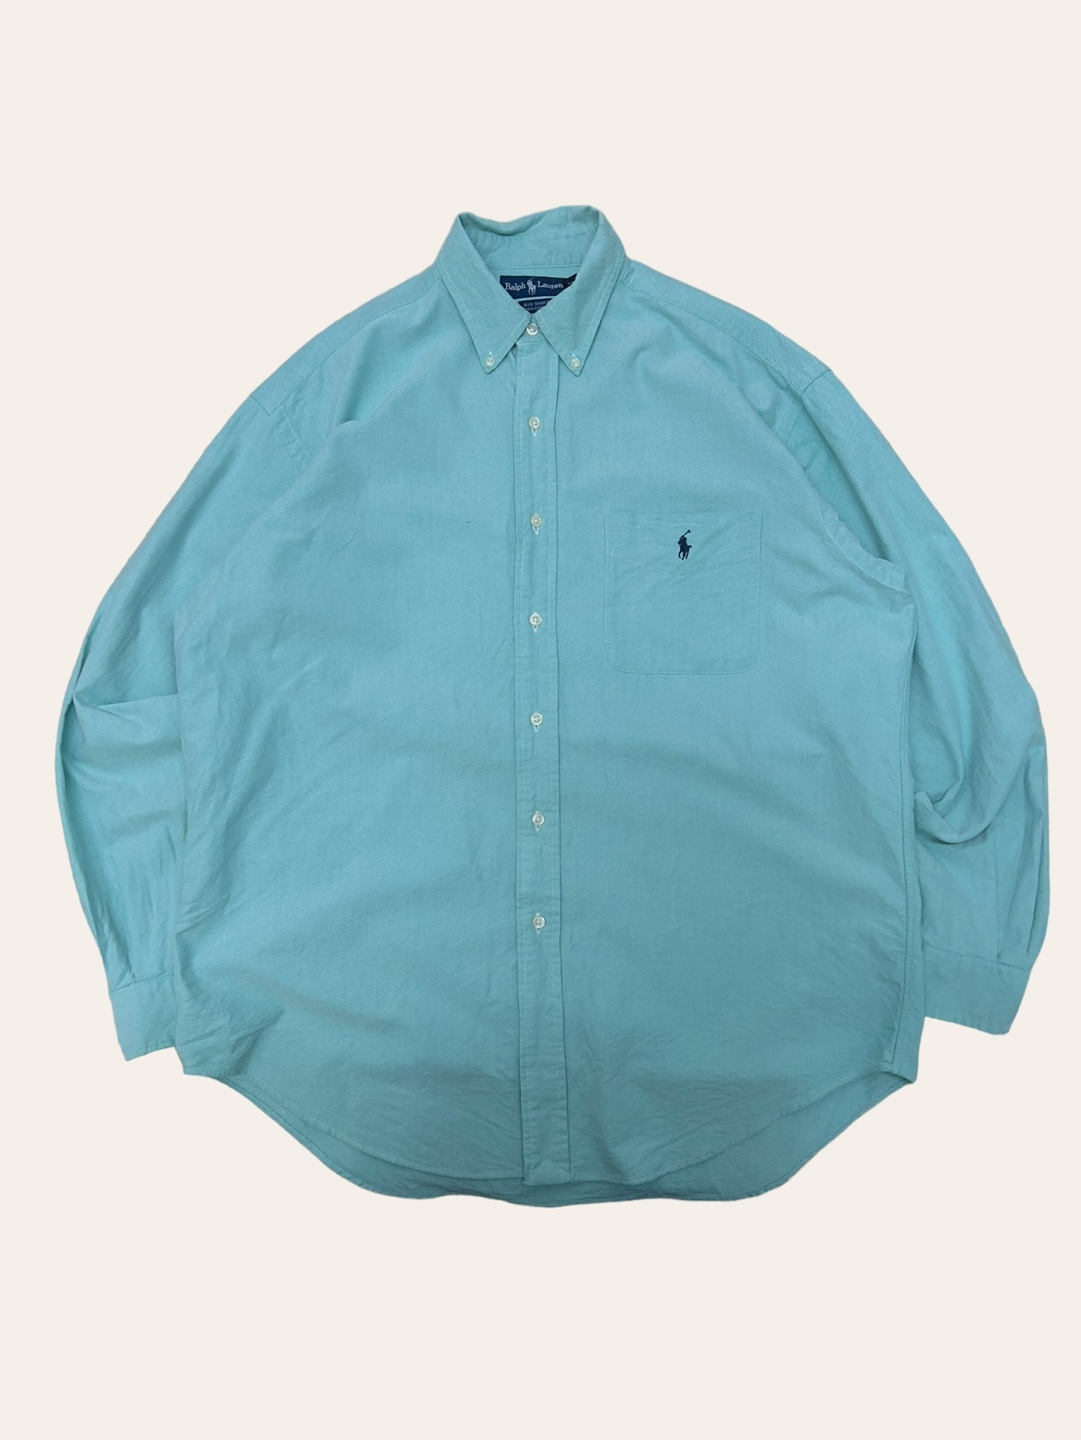 (From USA)Polo ralph lauren emerald color oxford BIG shirt M